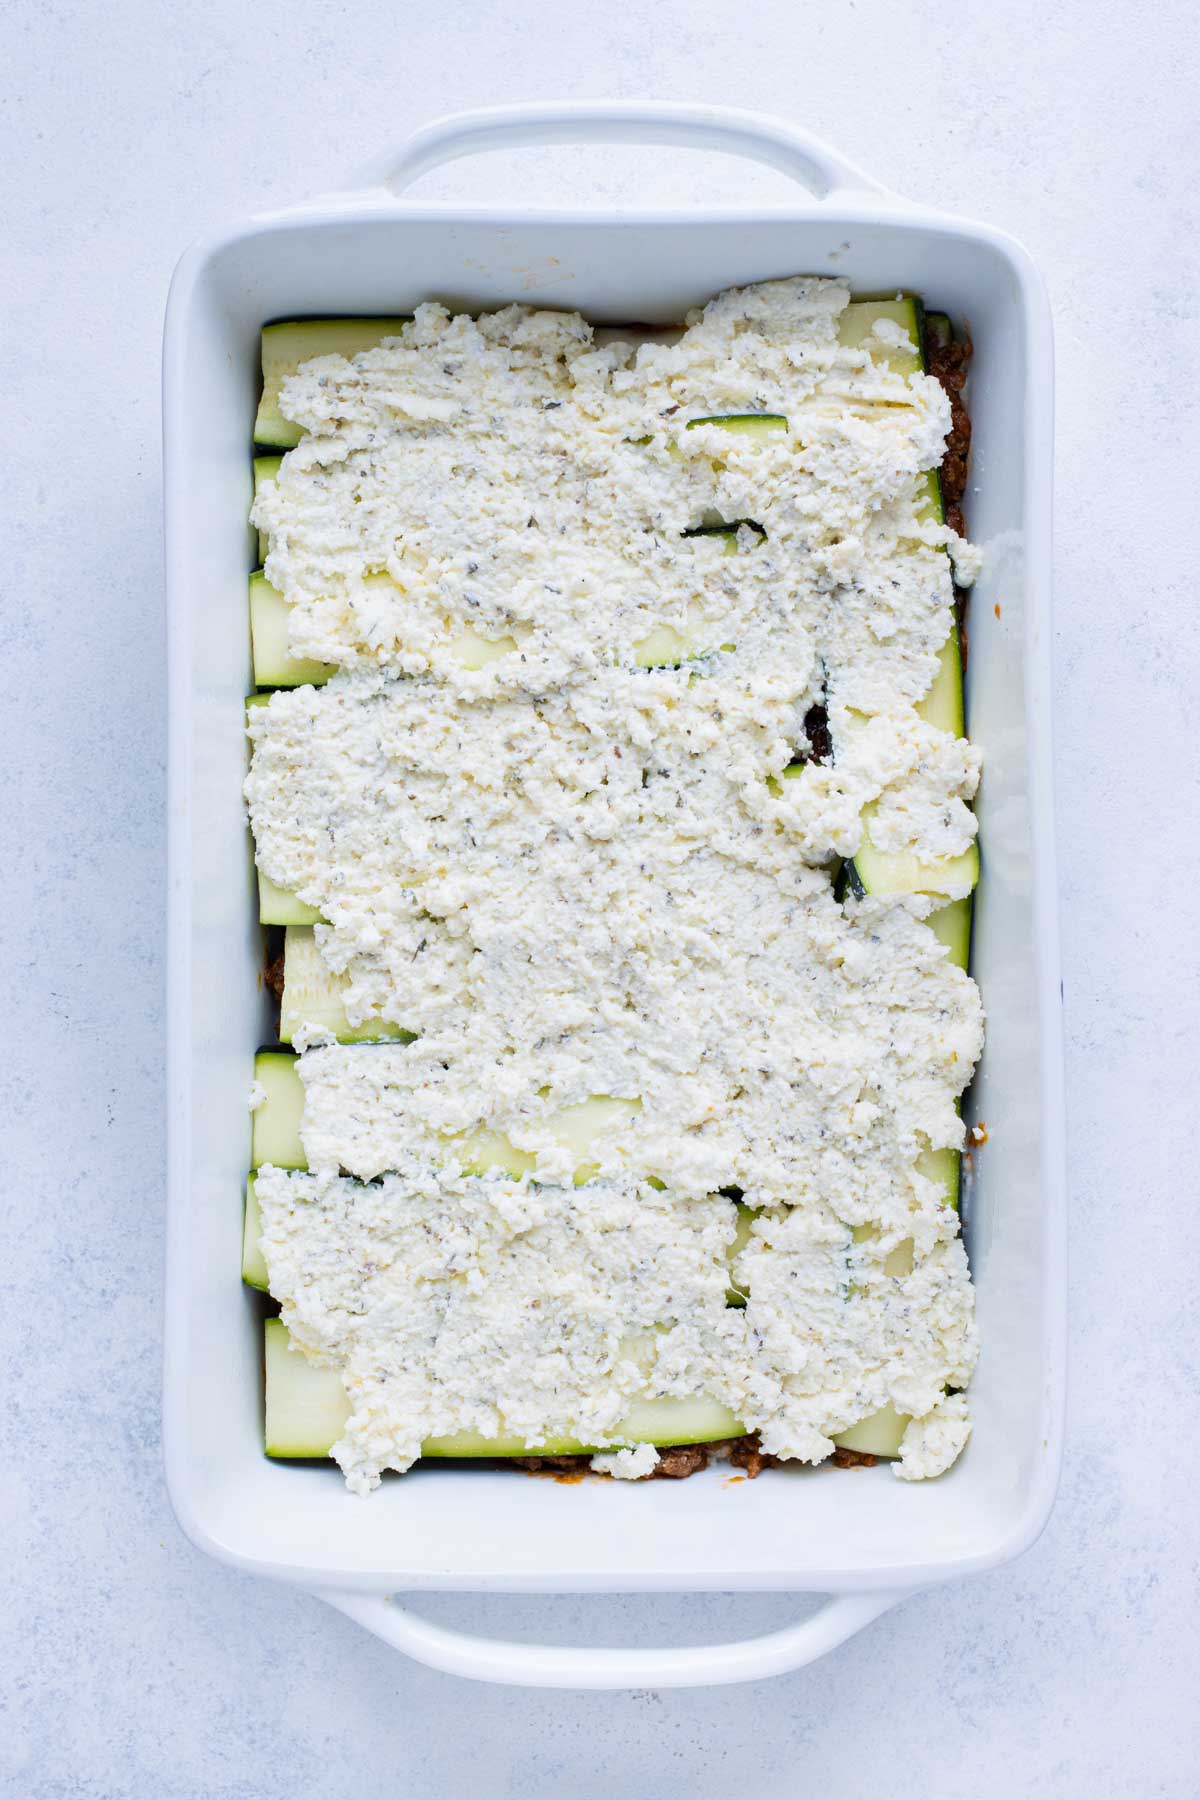 A second layer of ricotta cheese mixture is spread on top of the zucchini strips.